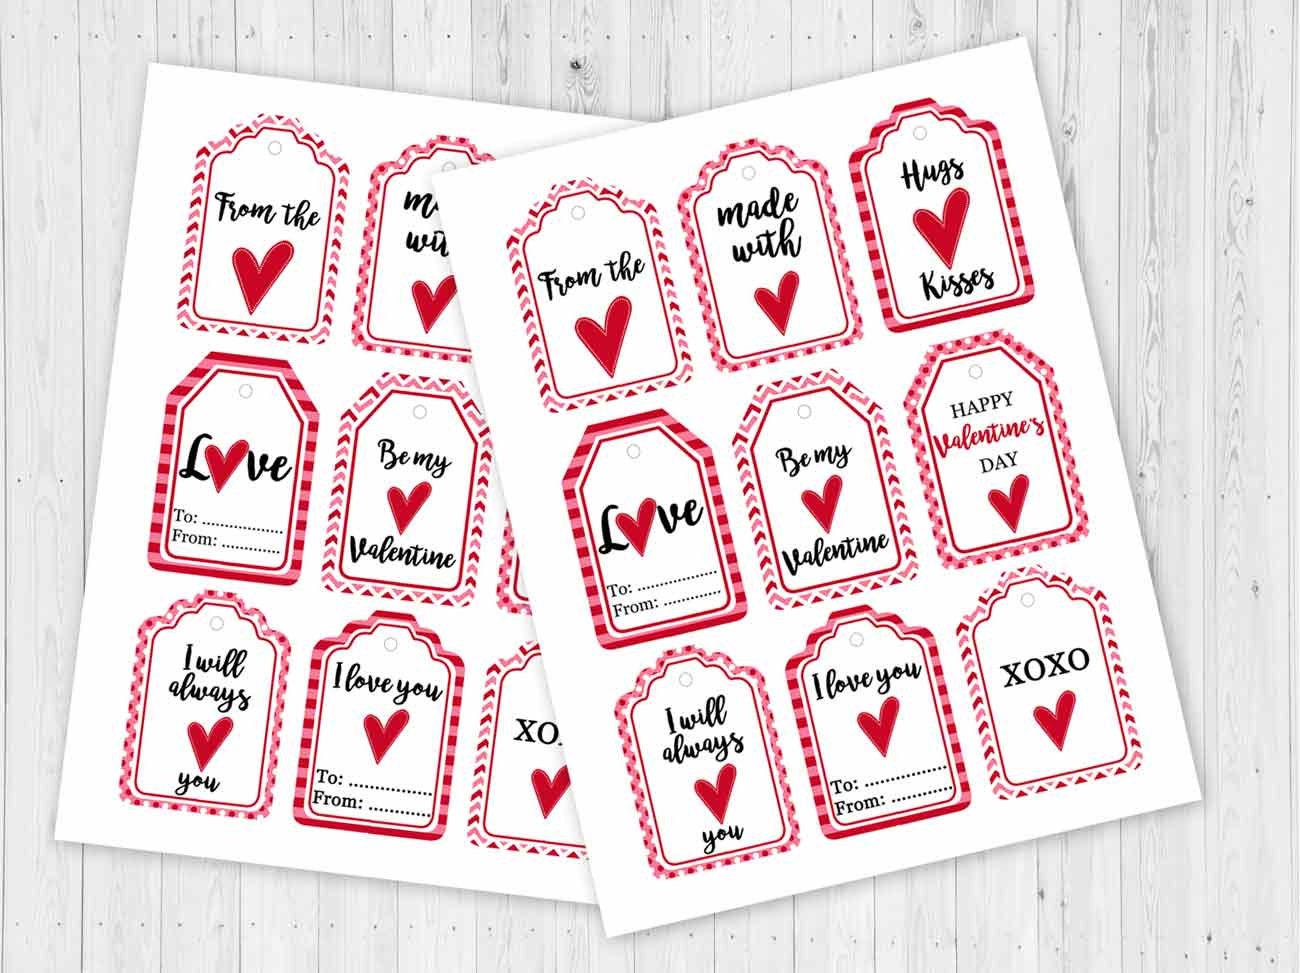 Personalized Valentine Stickers for Kids, Teal and Red Valentine Day Gift  Tags, Classroom Valentine Treats, Favor Stickers for school